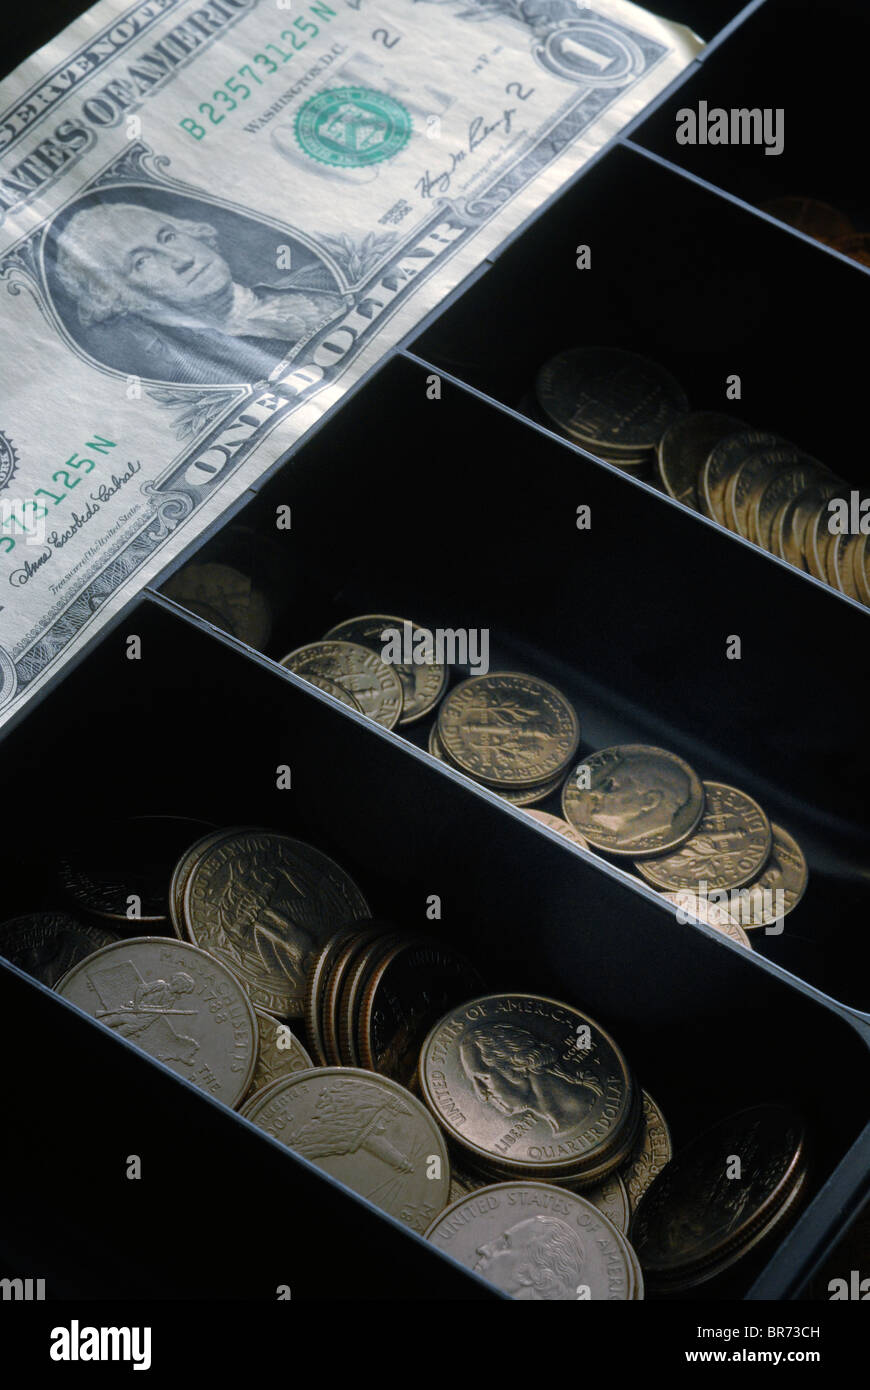 American money in a cash drawer Stock Photo